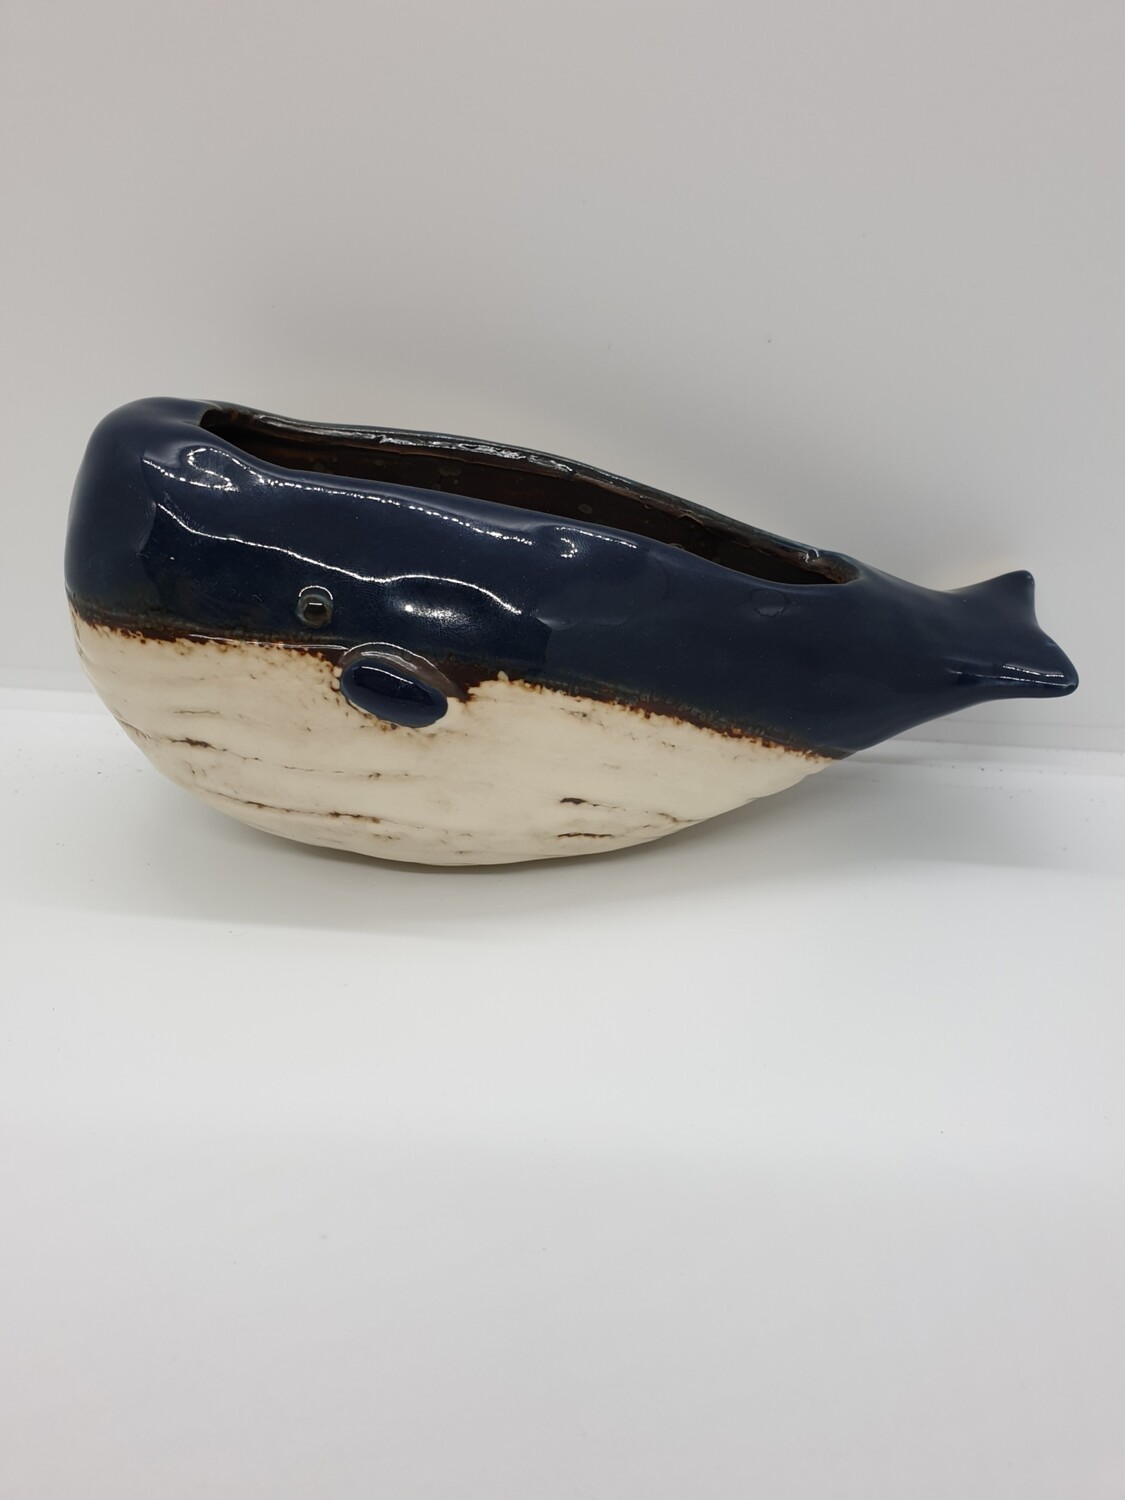 CERAMIC WALL MOUNTED WHALE PLANTER